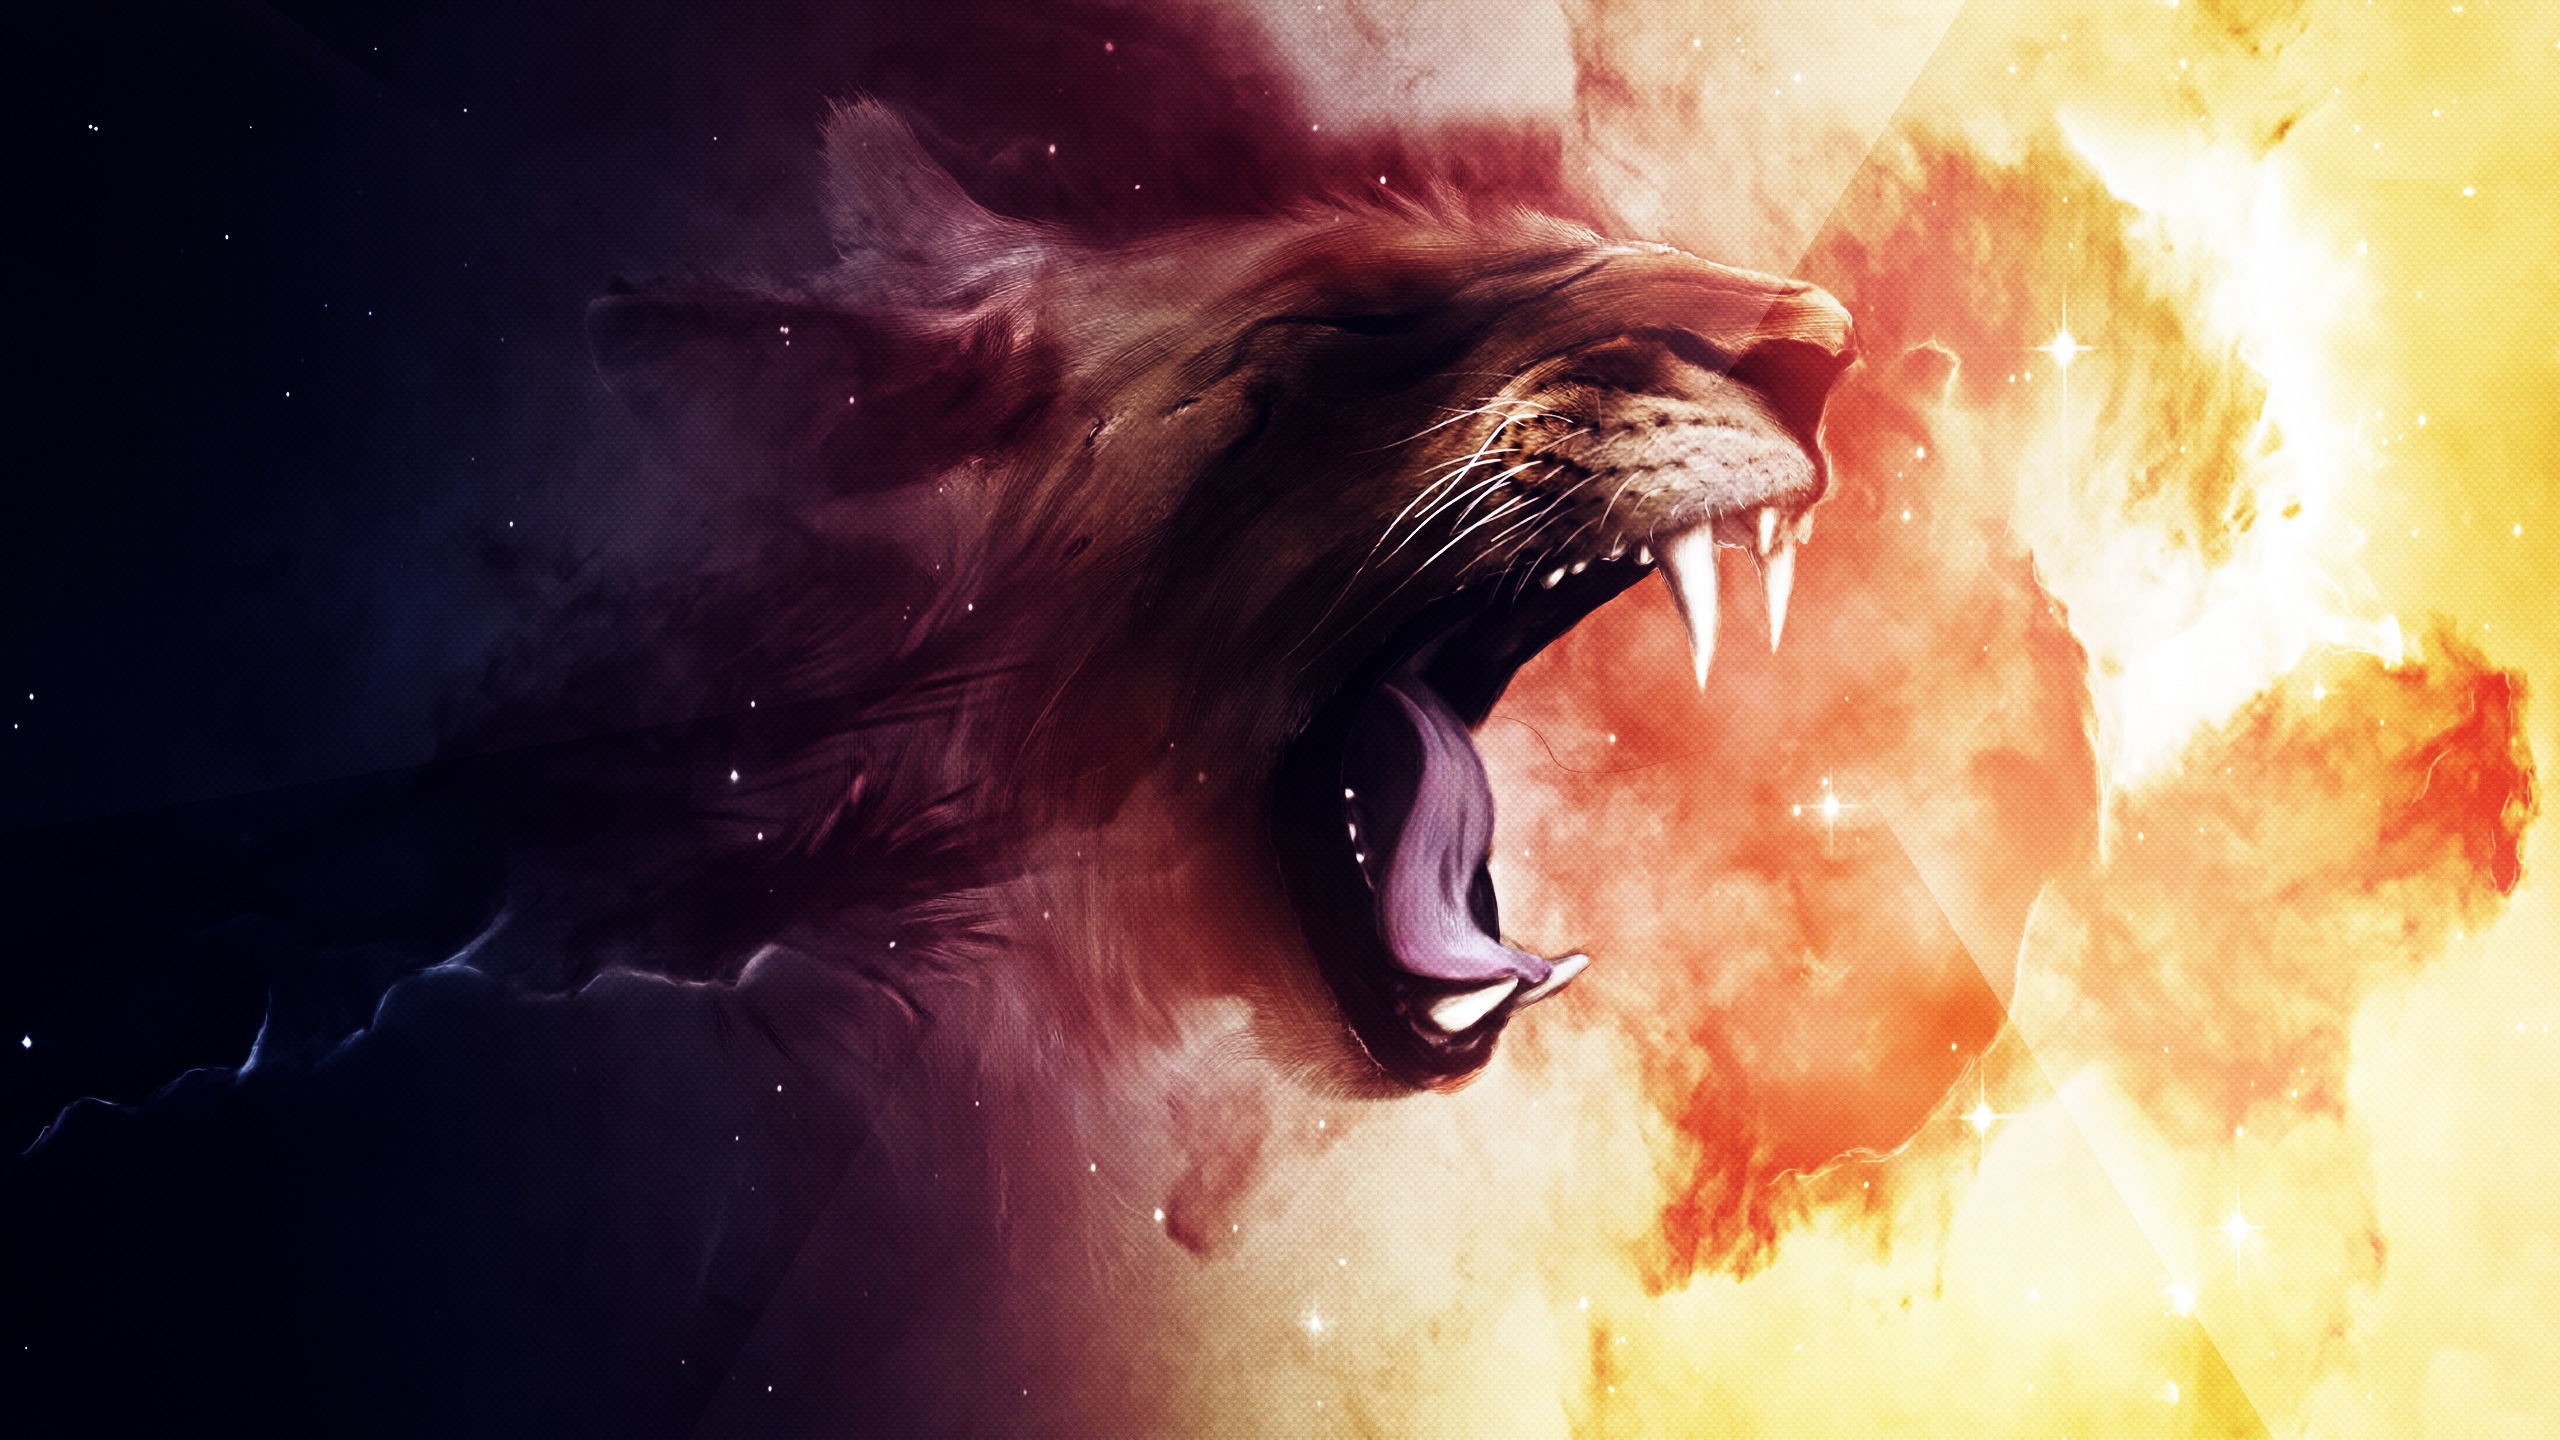 Rigid Space Lion for 2560x1440 HDTV resolution